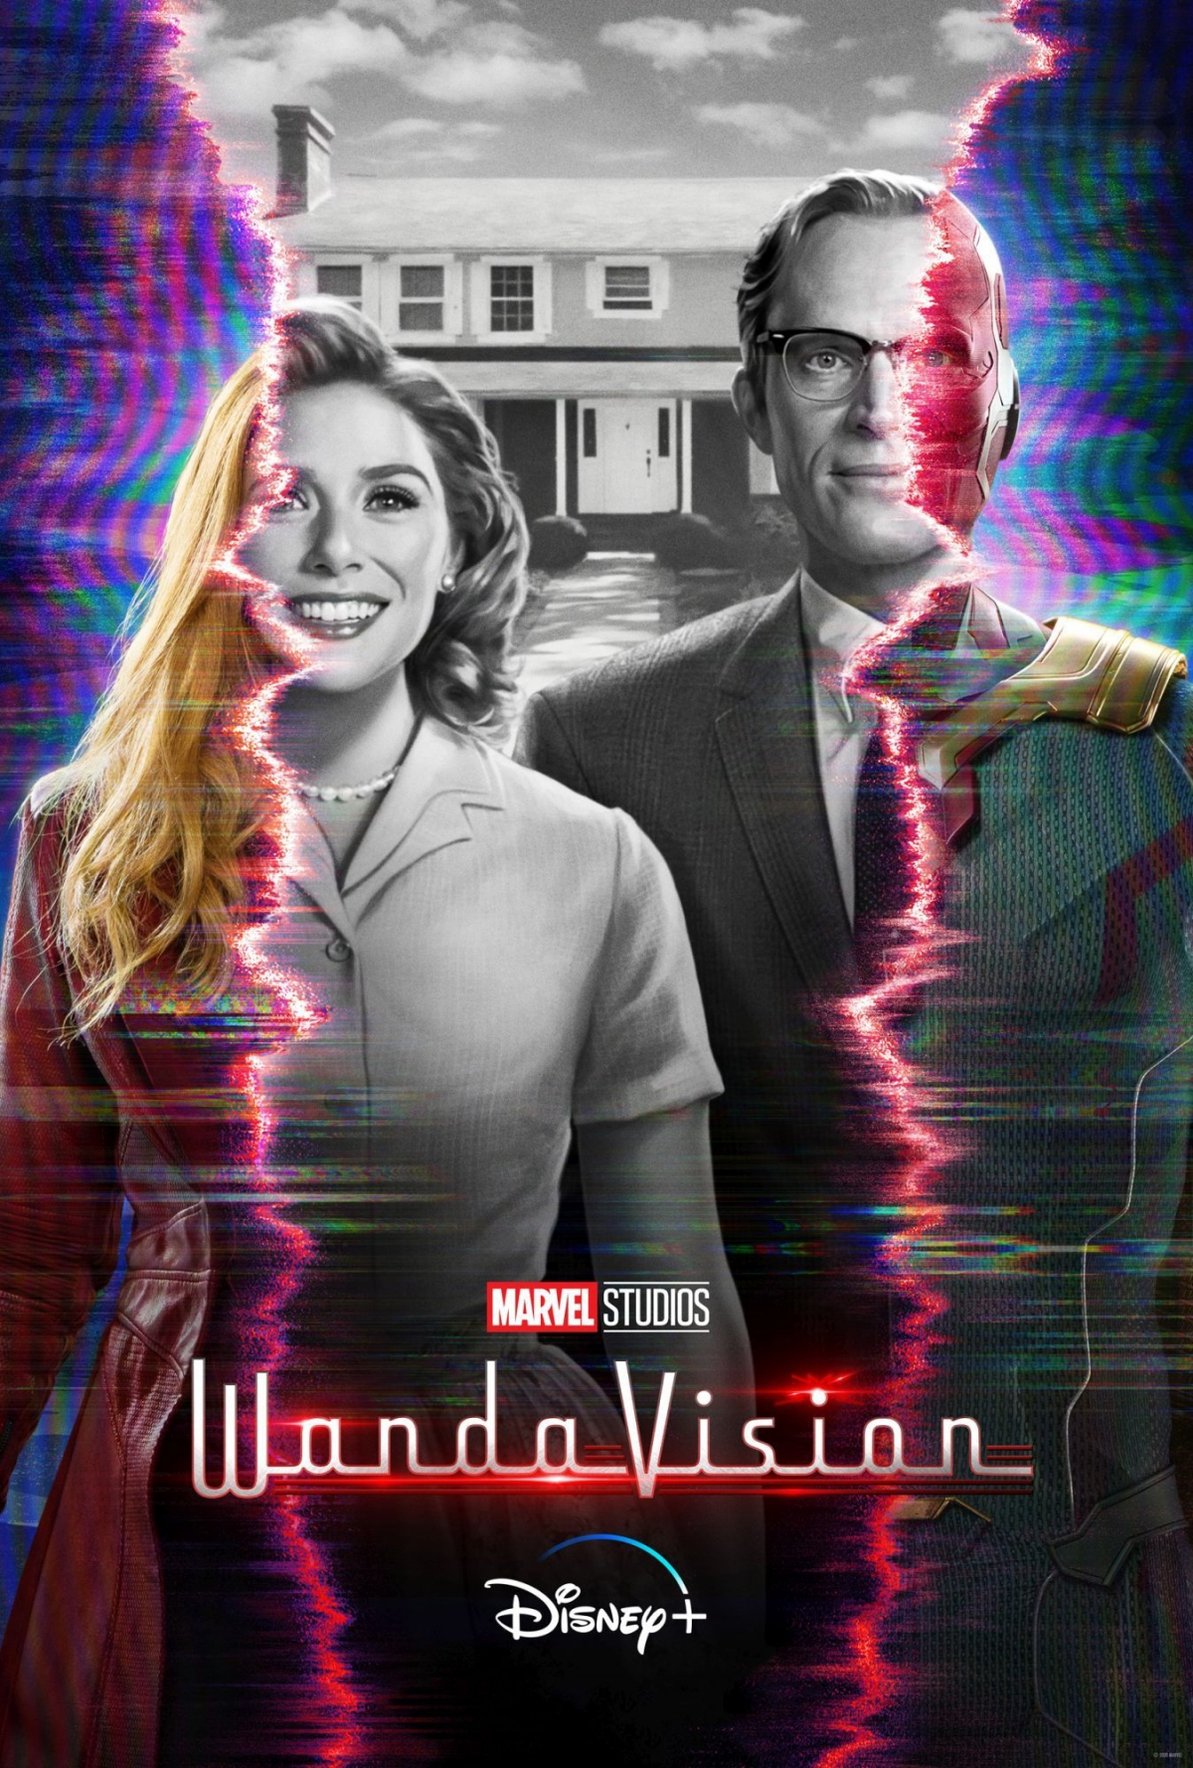 Kevin Feige Explains Why The Wacky WandaVision is Ideal For Marvel's First Sitcom